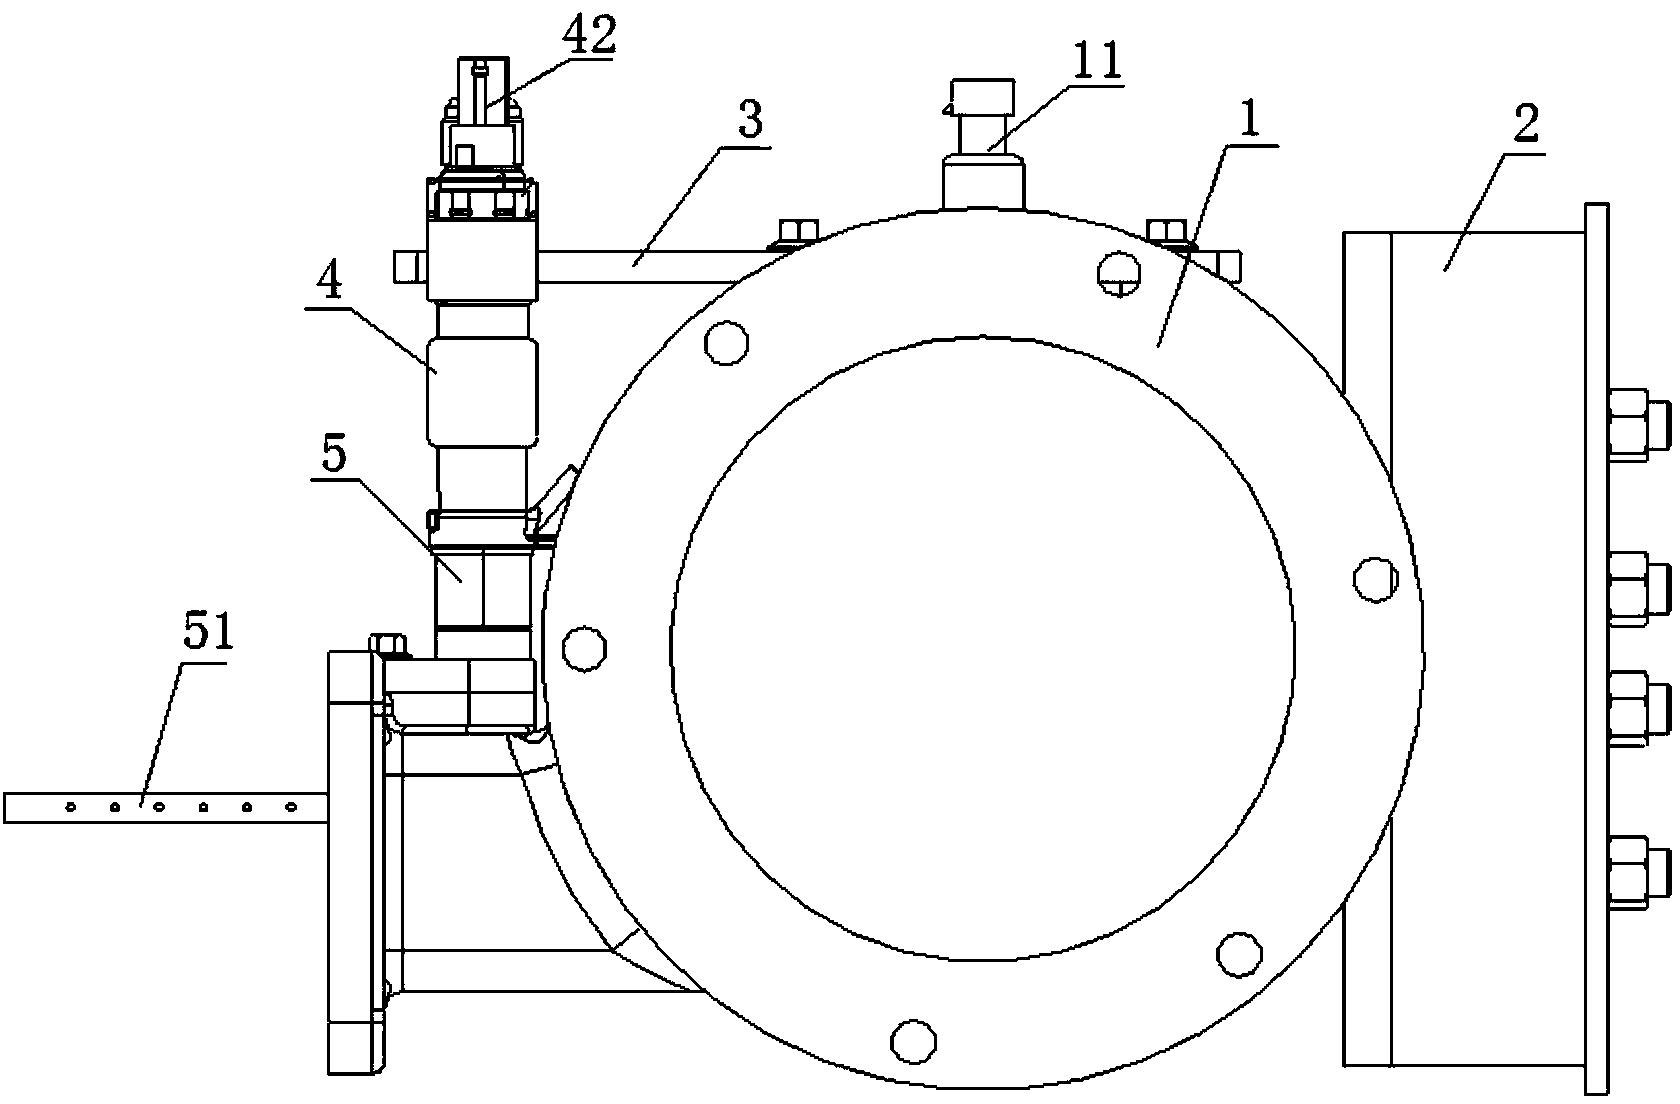 Fuel gas supply system of double-fuel diesel engine